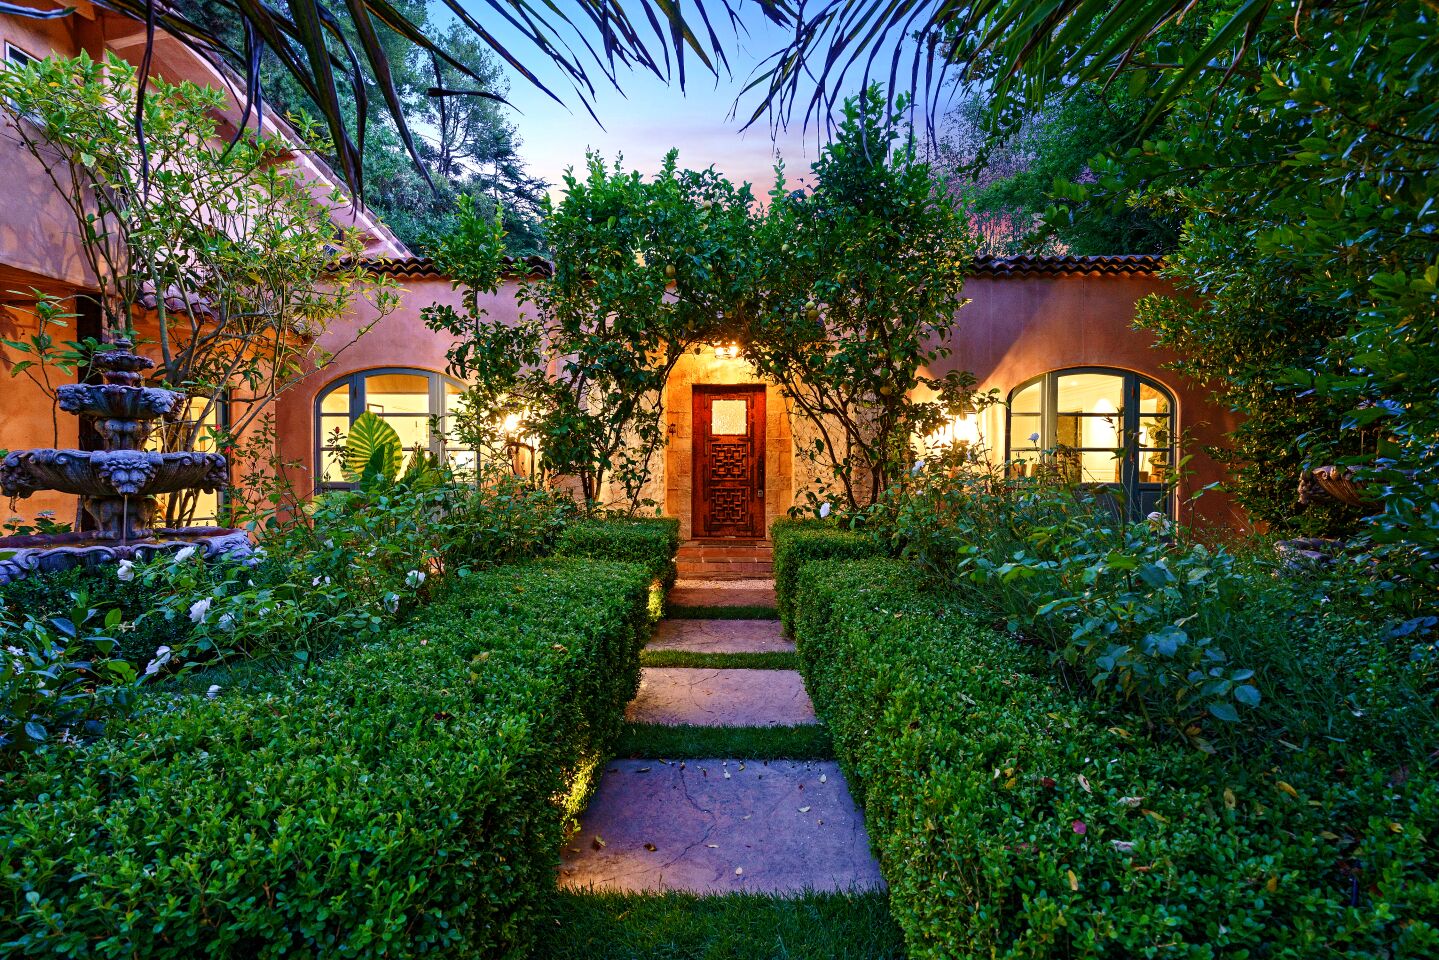 Hedges and large stone pavers lead up the the entrance of a Mediterranean-style home in the Hollywood Hills